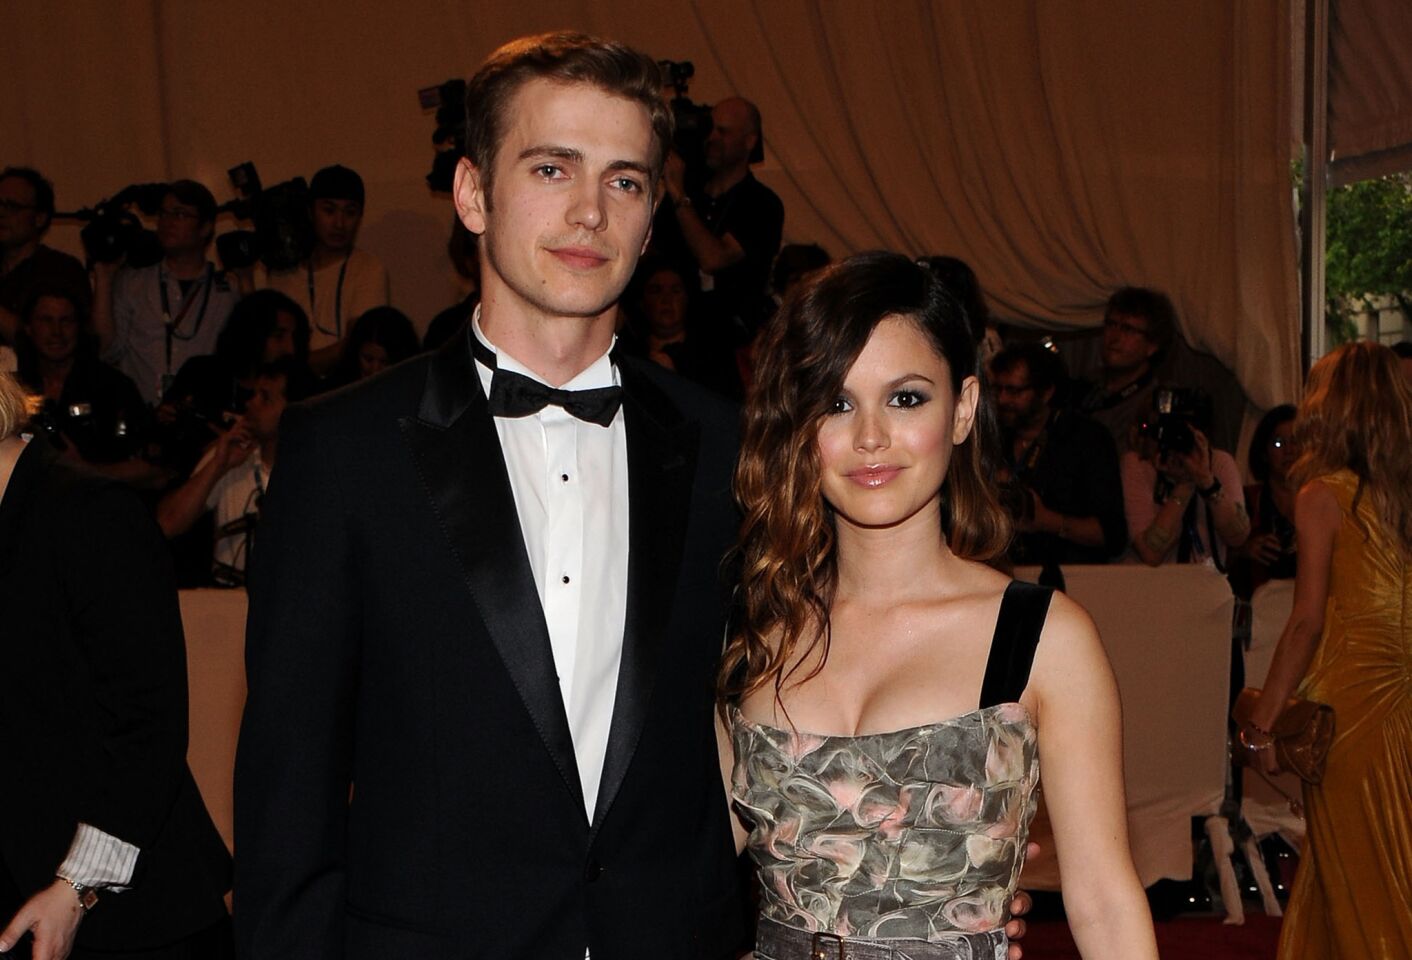 Rachel Bilson and boyfriend Hayden Christensen are now first-time parents to daughter Briar Rose Christensen. The pair got engaged in December 2008 but called things off because of their separate lives.